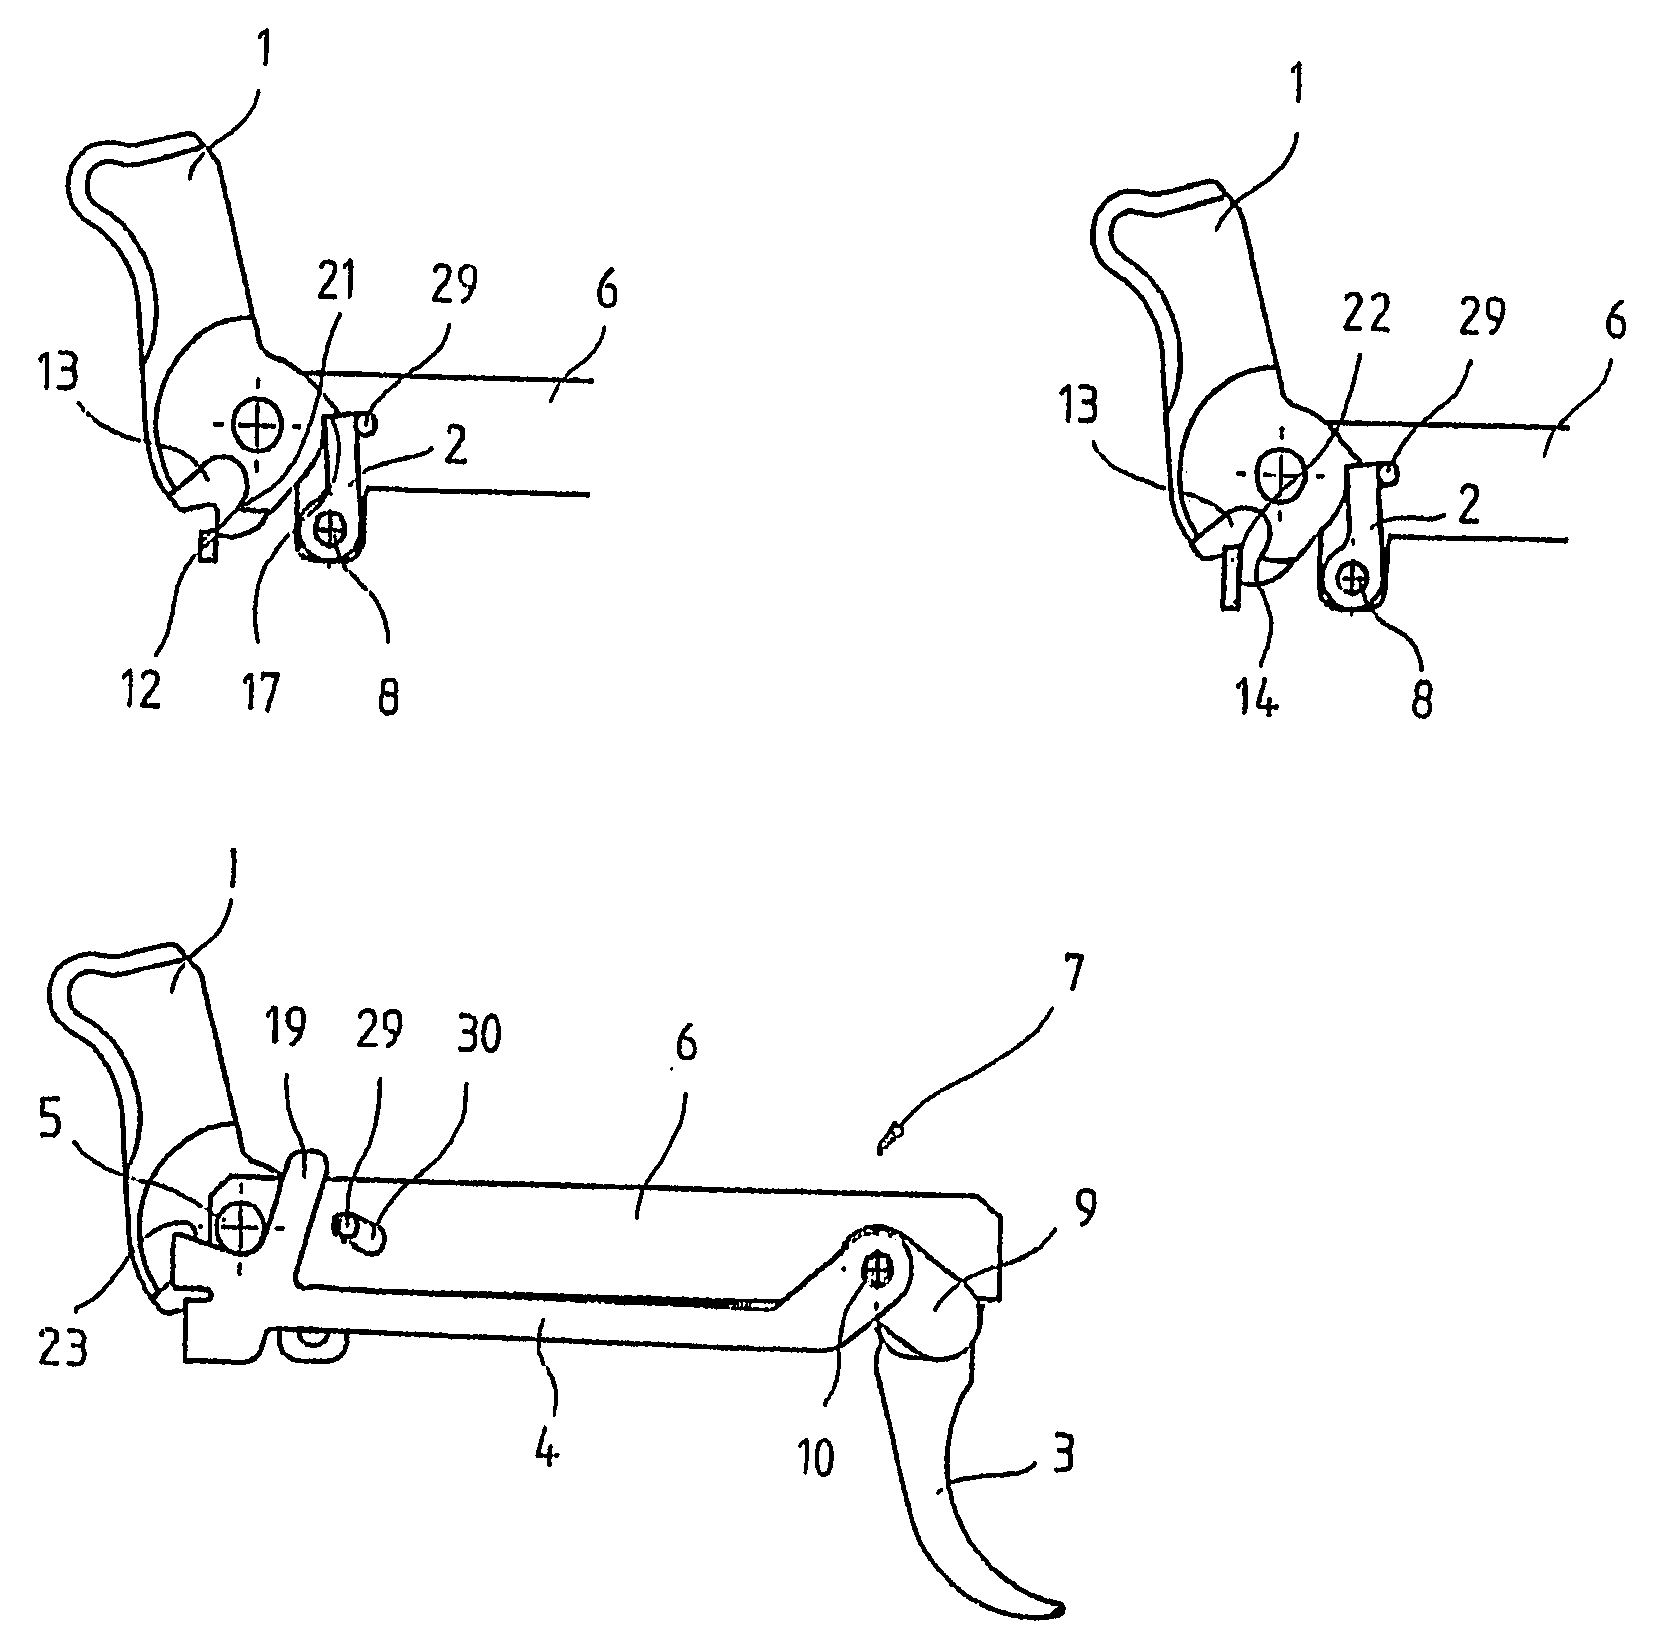 Trigger system for small arms